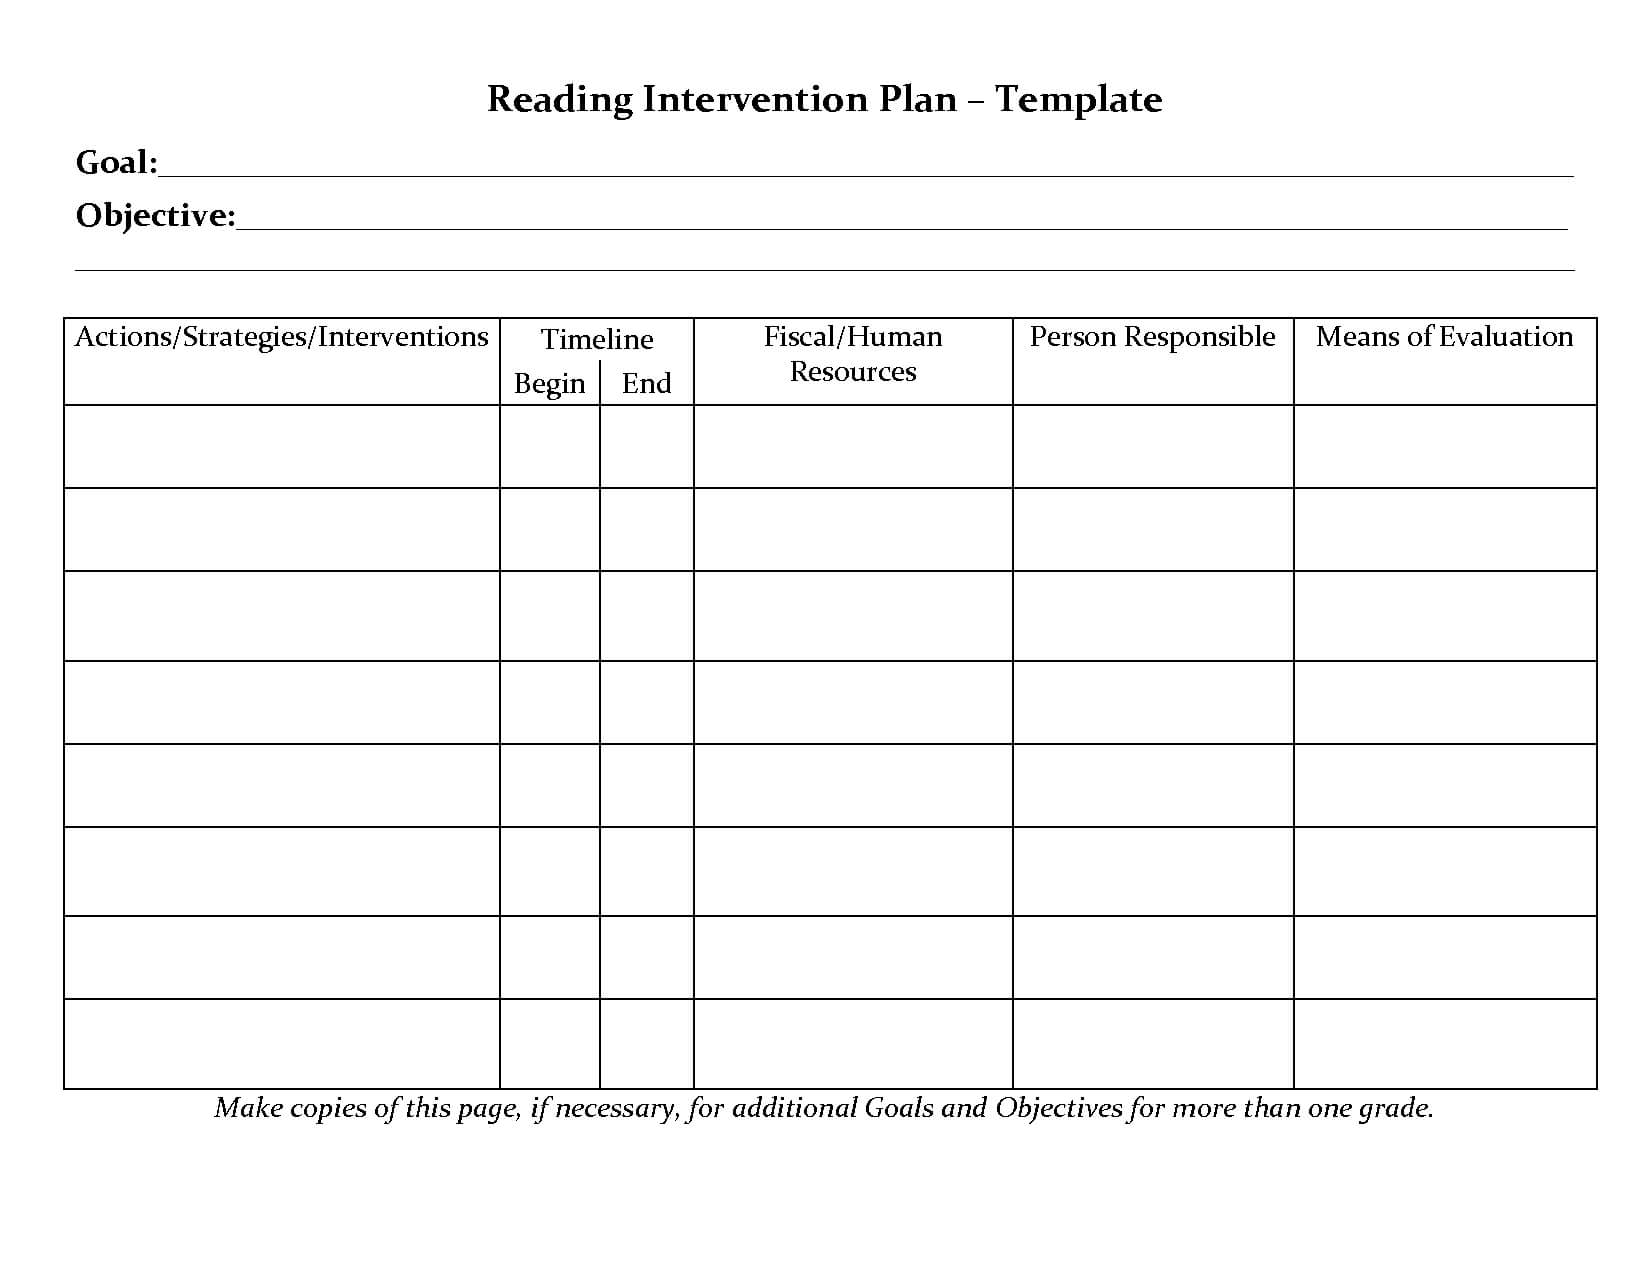 020 Rti Math Lesson Plan Template Reading Intervention Throughout Intervention Report Template